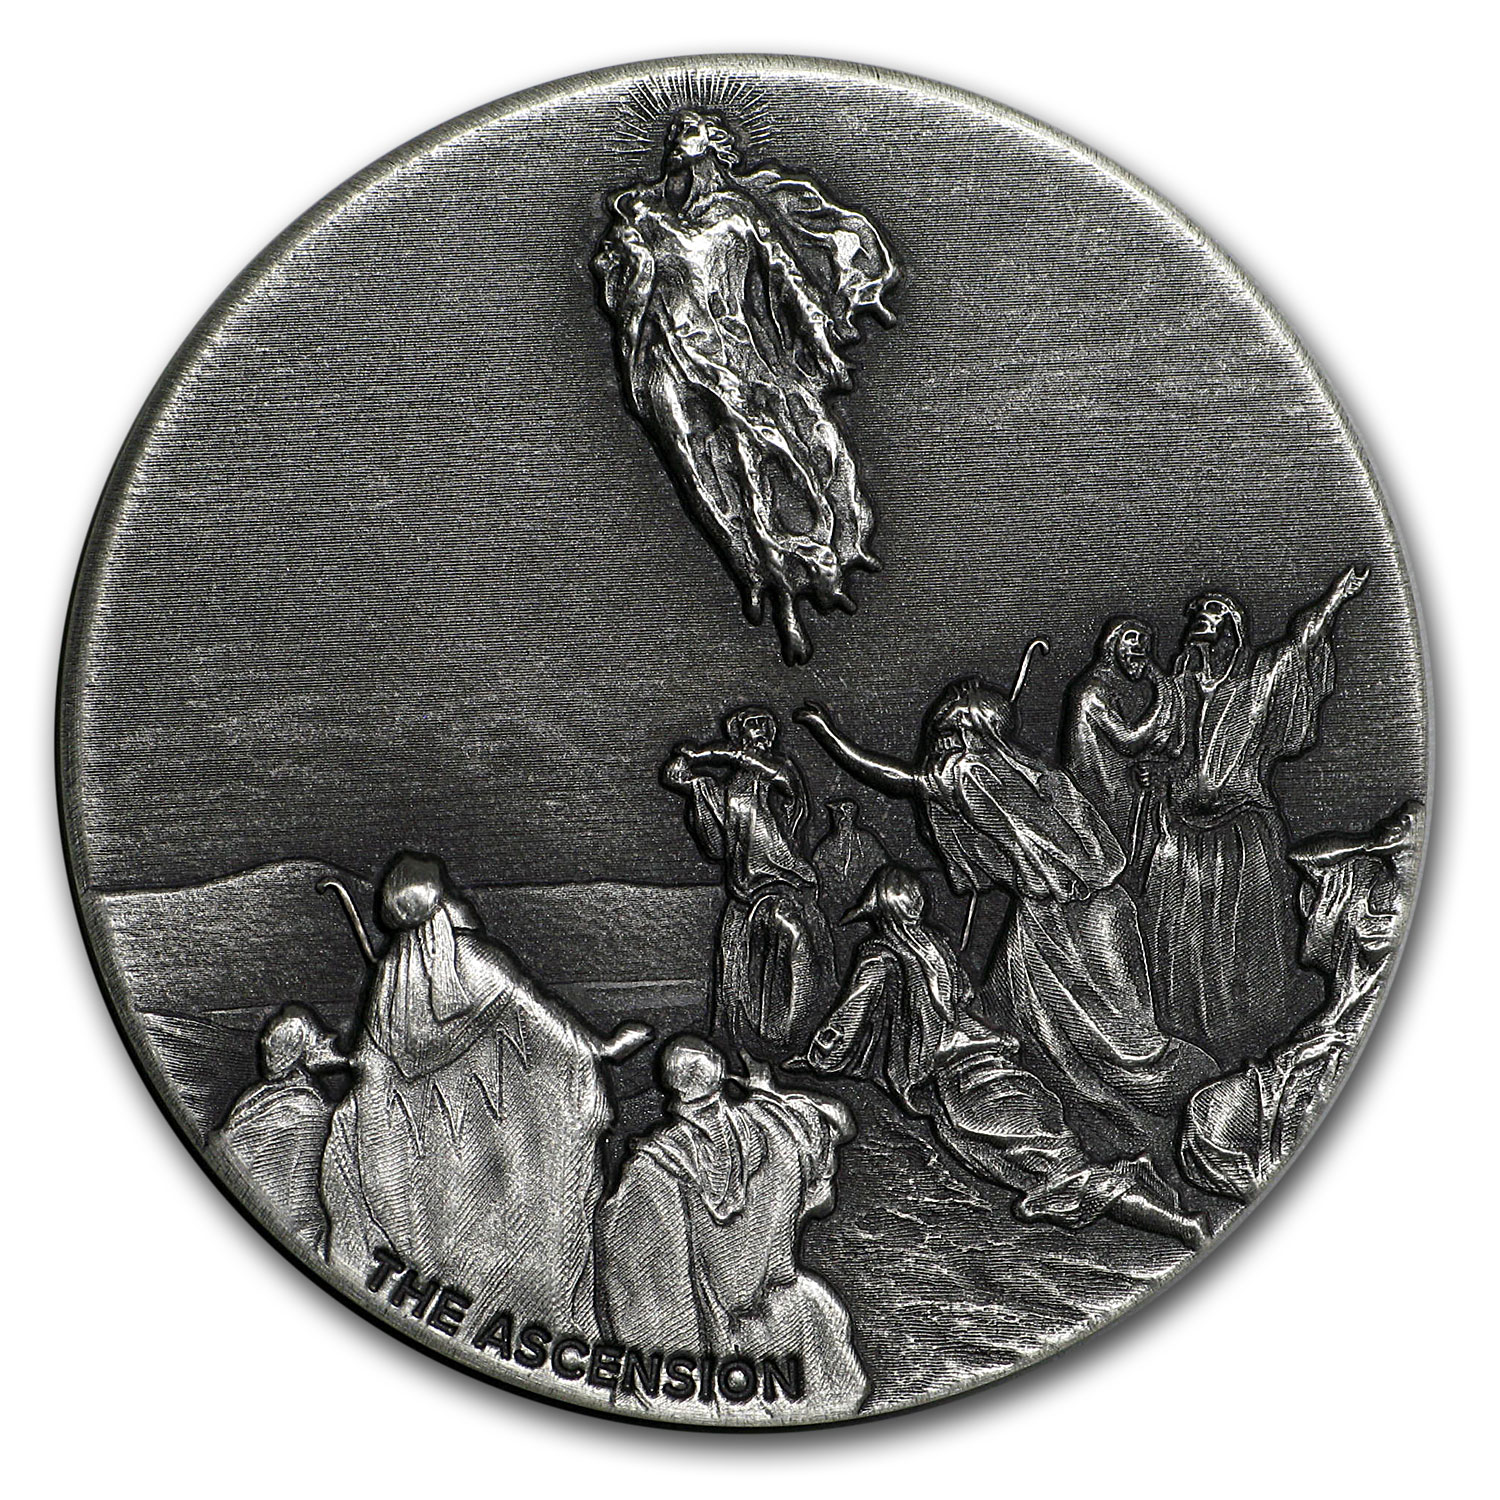 Buy 2018 2 oz Silver Coin - Biblical Series (Ascension of Christ)